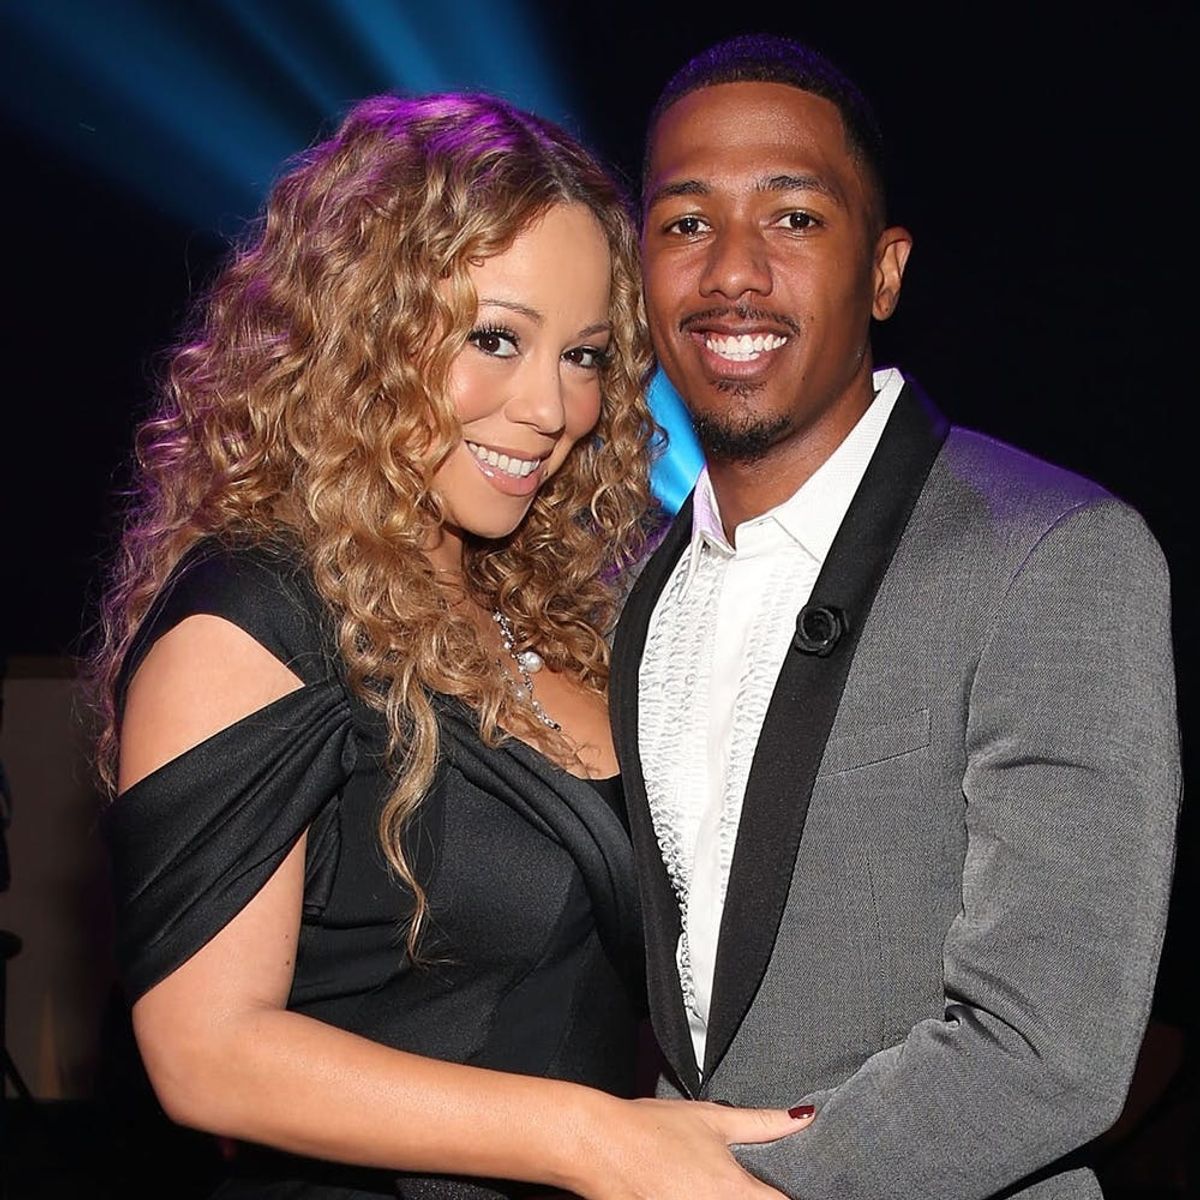 Nick Cannon Just Spilled the Tea on Mariah Carey’s Biggest Diva Moment